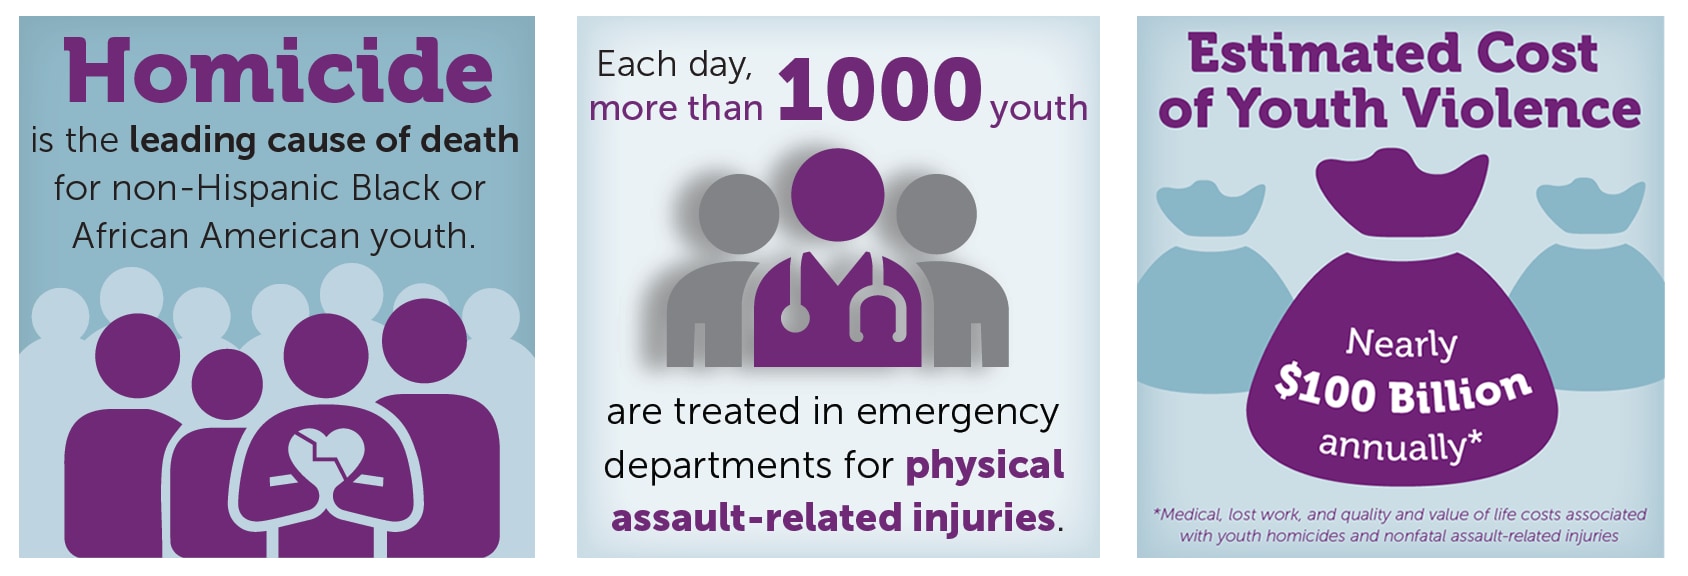 leading cause of death for non-Hispanic Black youth. assault-related injuries. Estimated cost of YV.